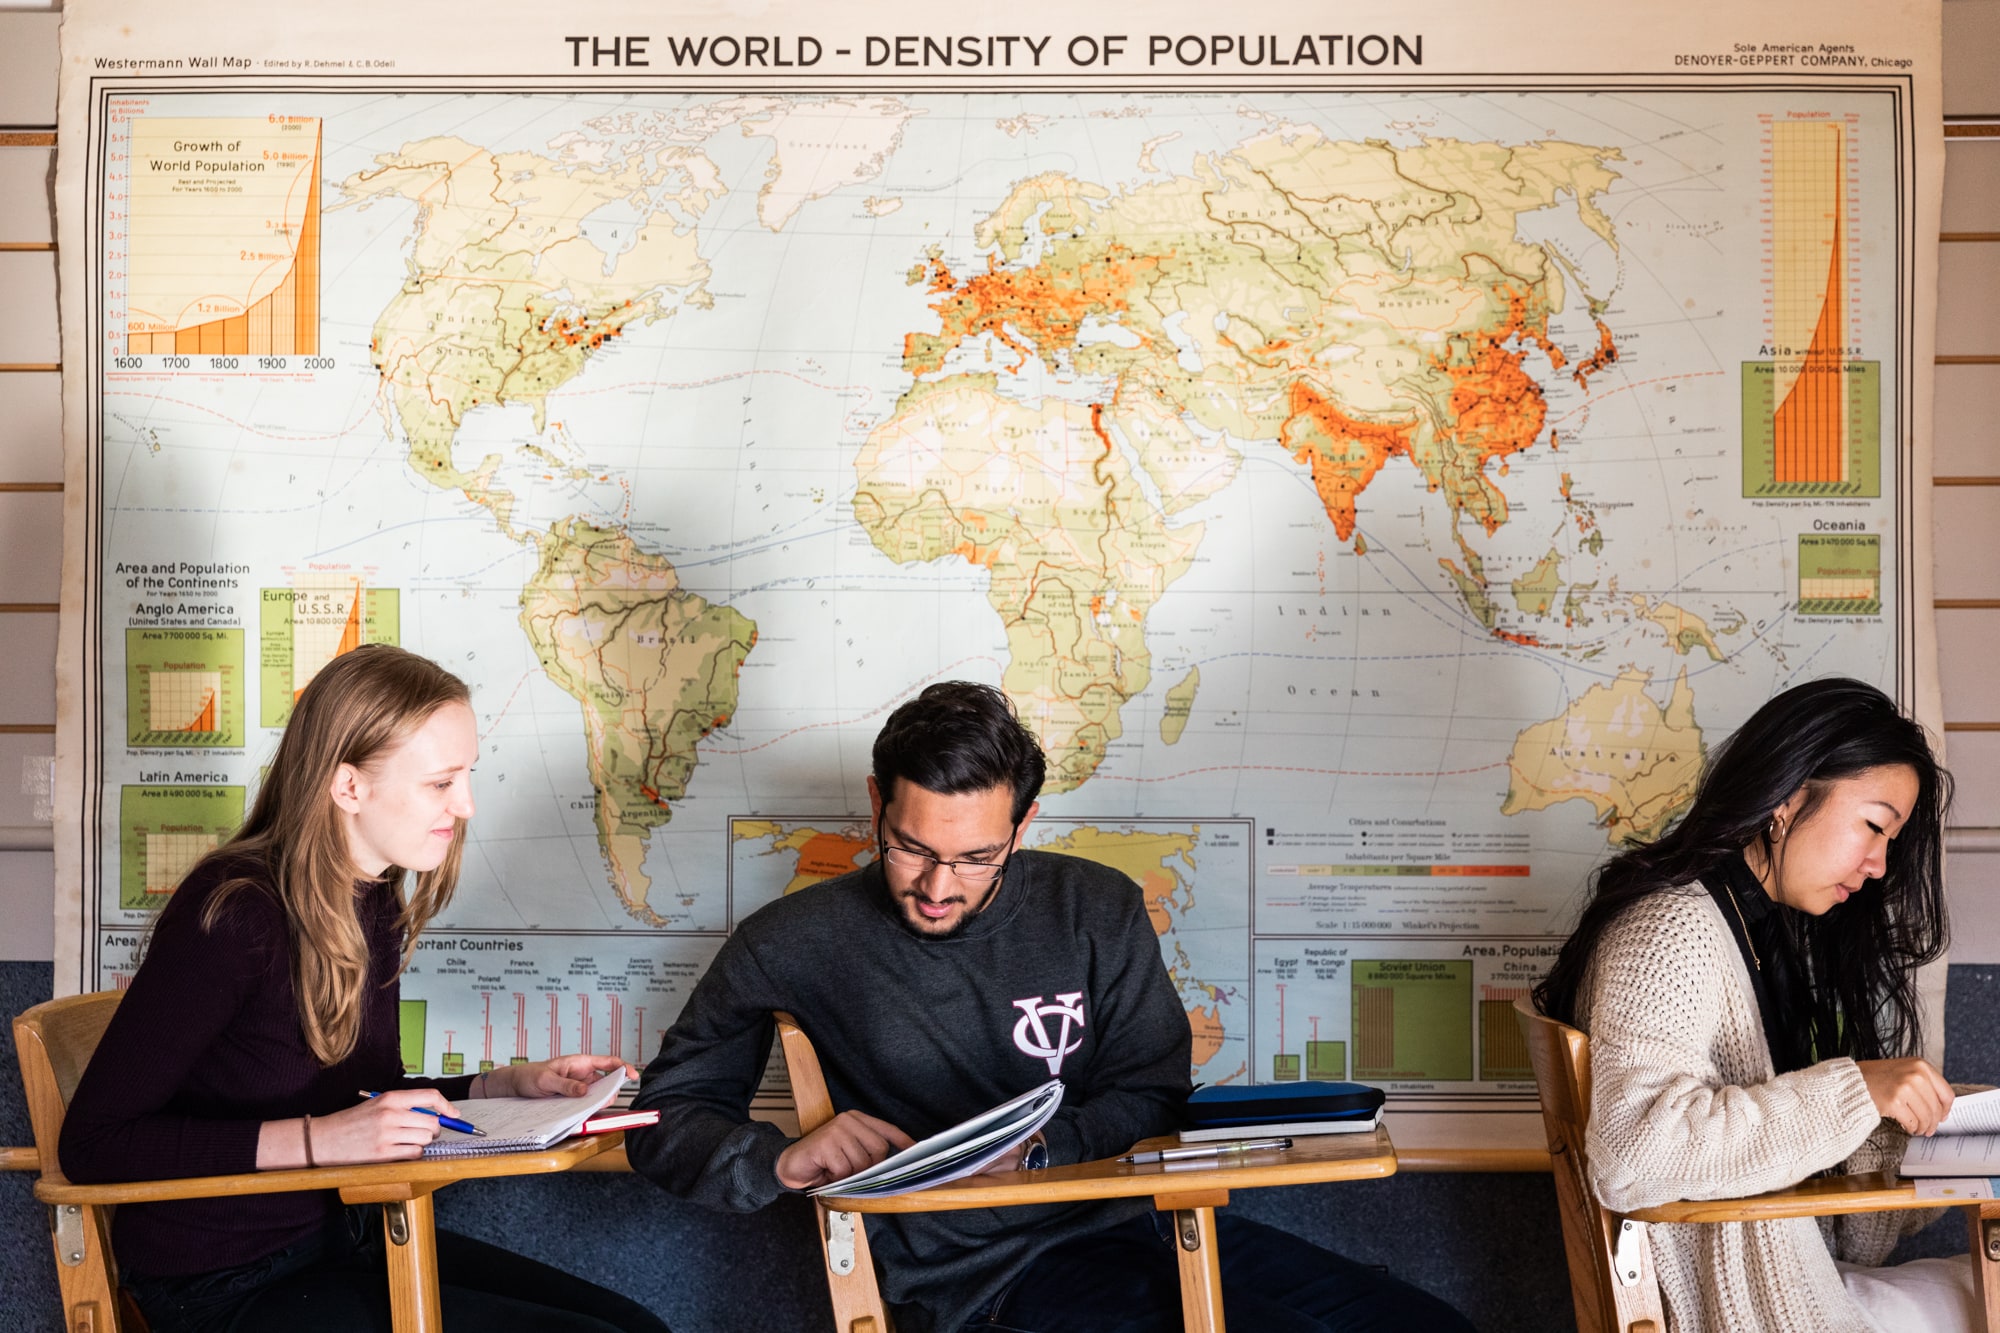 A student with dark hair and a mustache sits at a desk in a classroom, next to a giant map of the world.